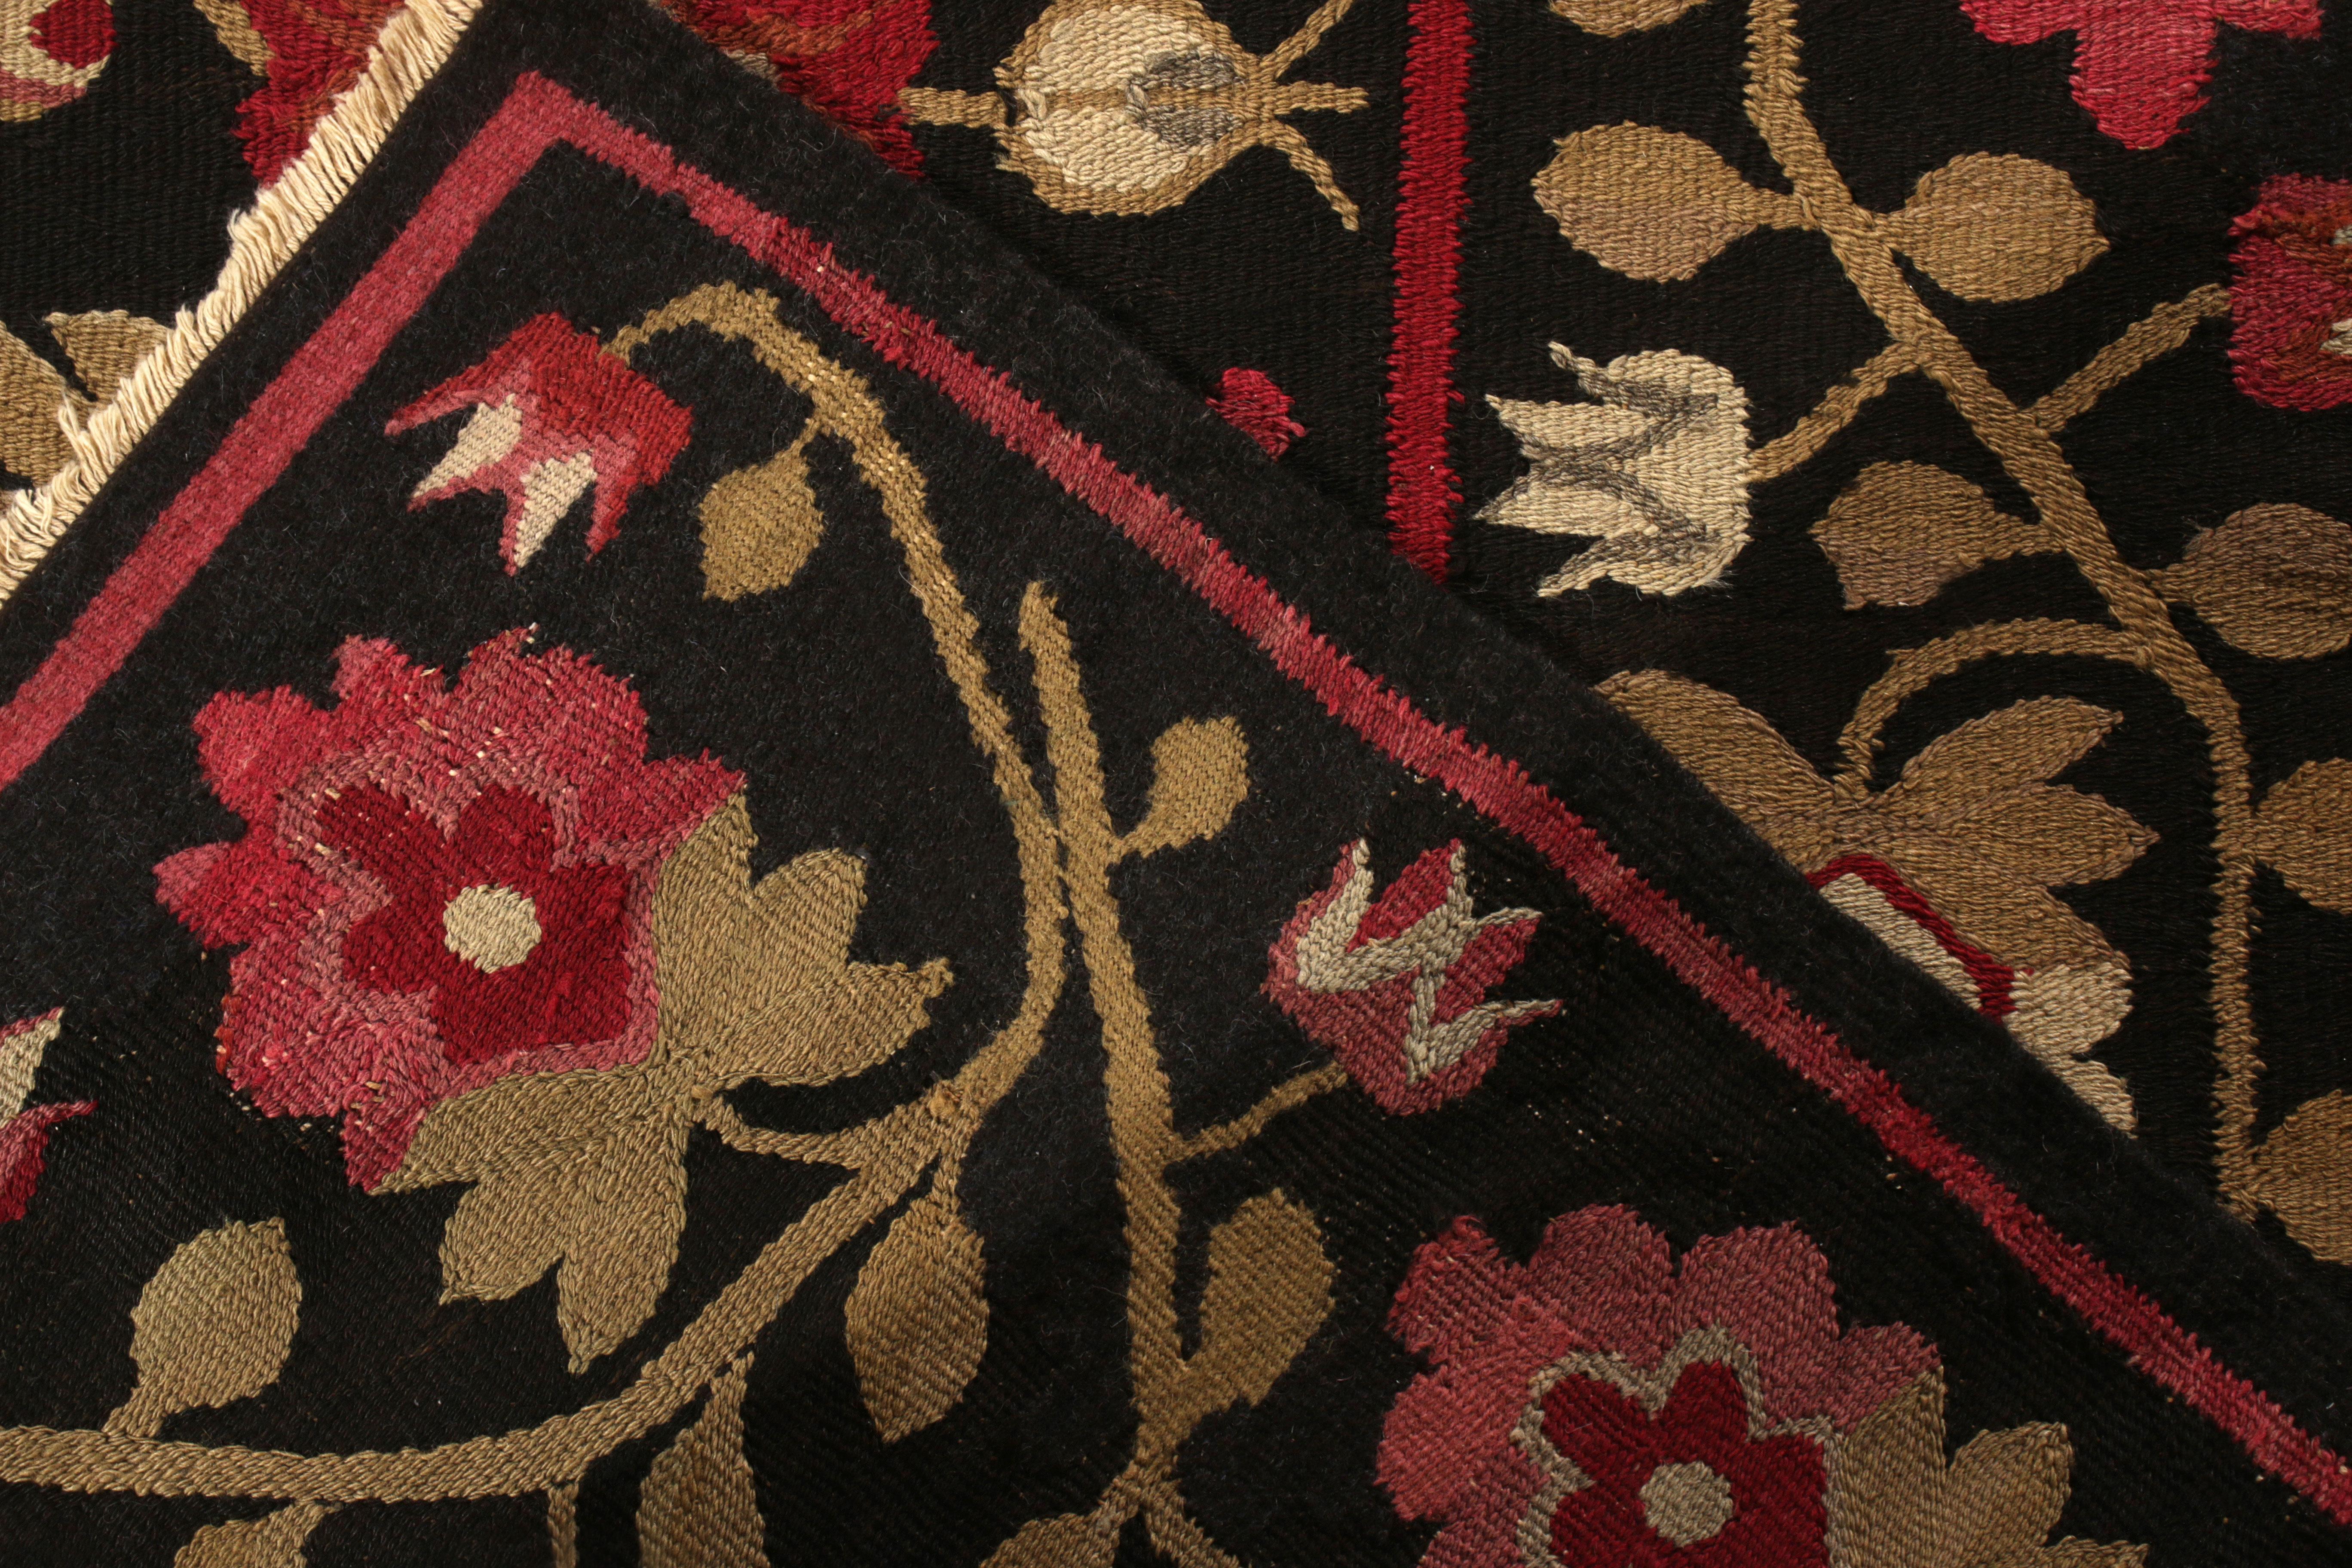 Hand-Knotted Antique Bessarabian Kilim Rug in Black with Red Floral Pattern by Rug & Kilim For Sale